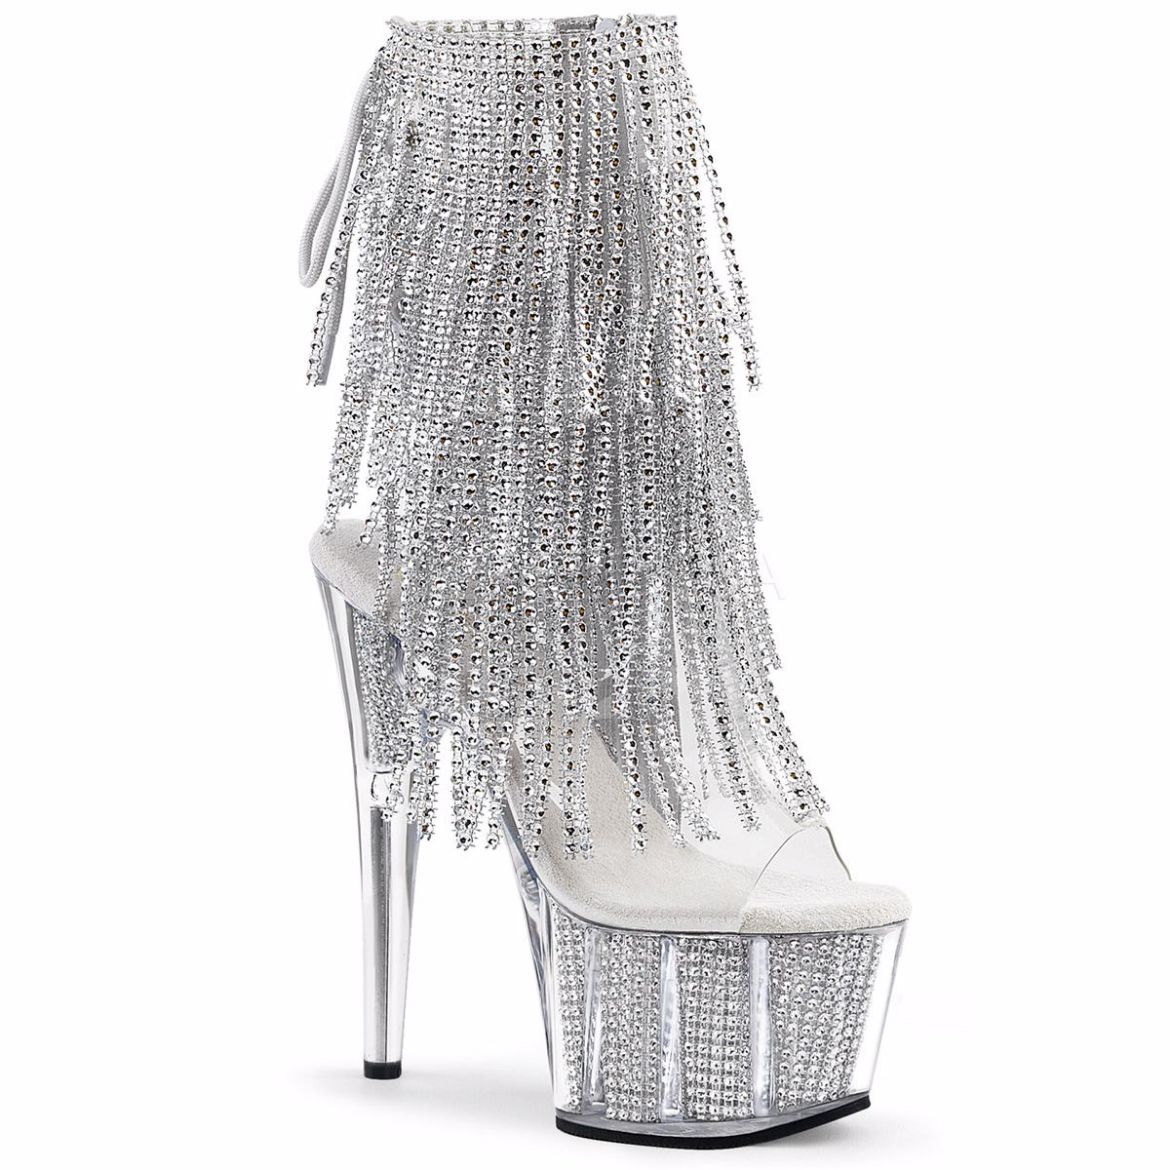 Product image of Pleaser Adore-1017Srs Clear-Silver Rhinestone/Silver Rhinestone, 7 inch (17.8 cm) Heel, 2 3/4 inch (7 cm) Platform Ankle Boot